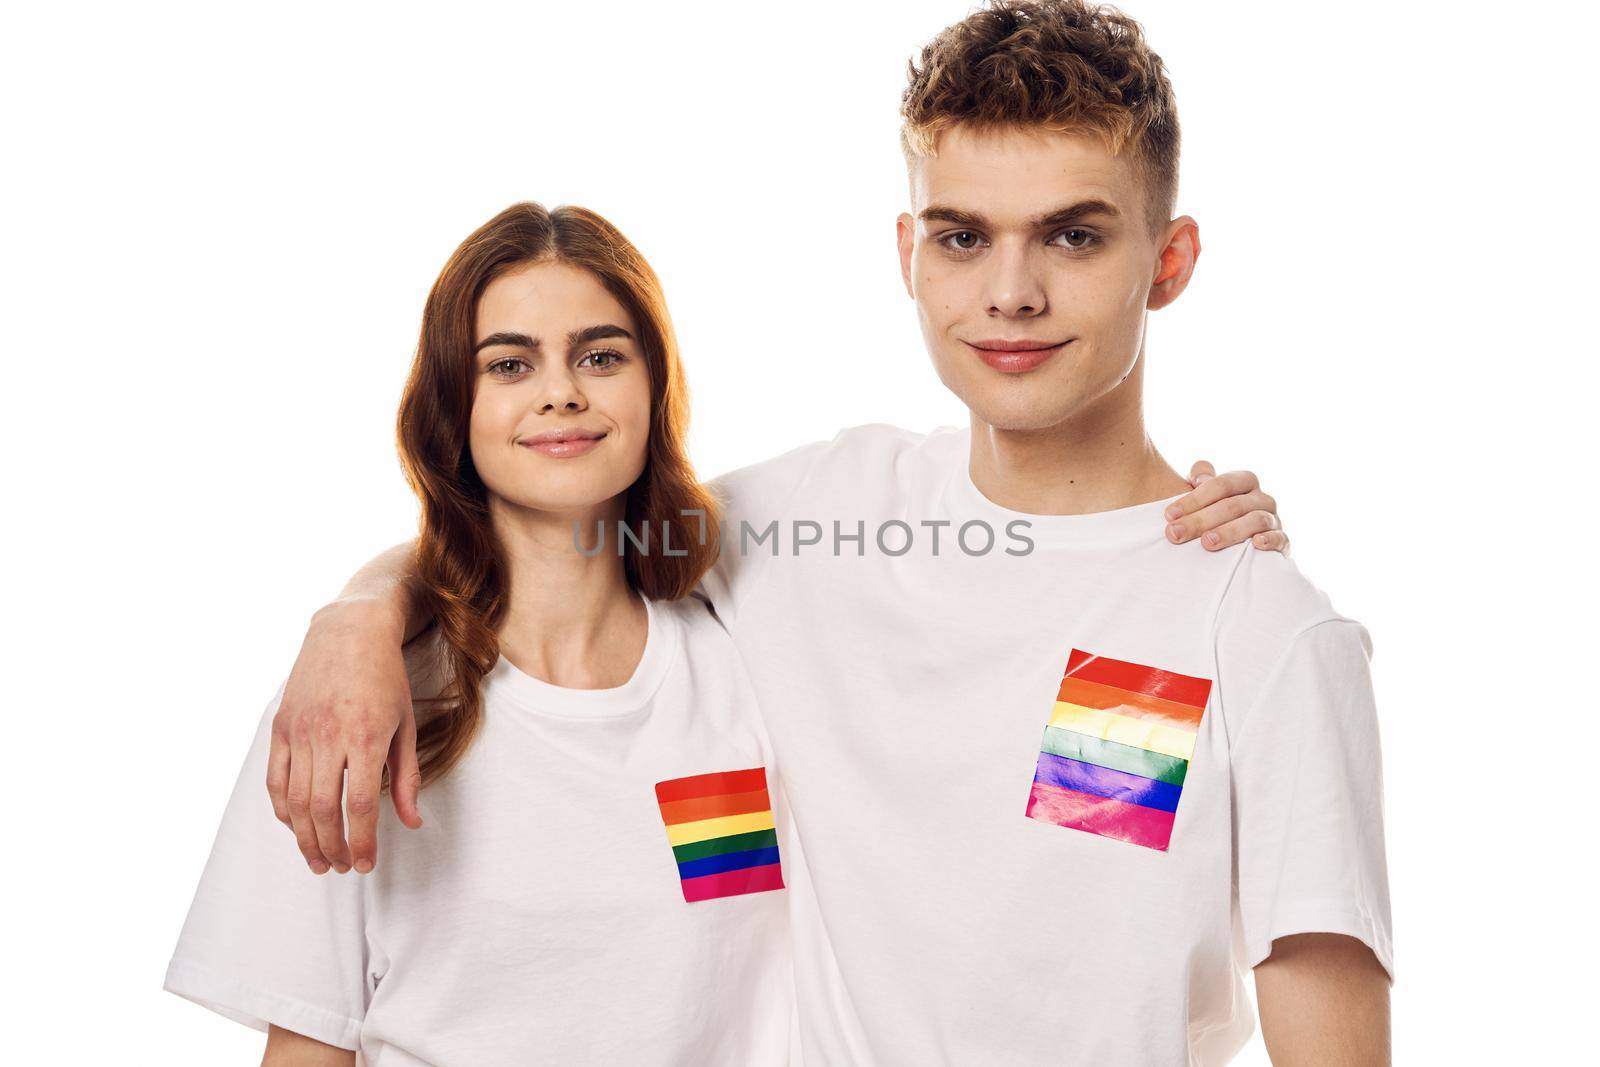 young couple lgbt community flag transgender lifestyle. High quality photo